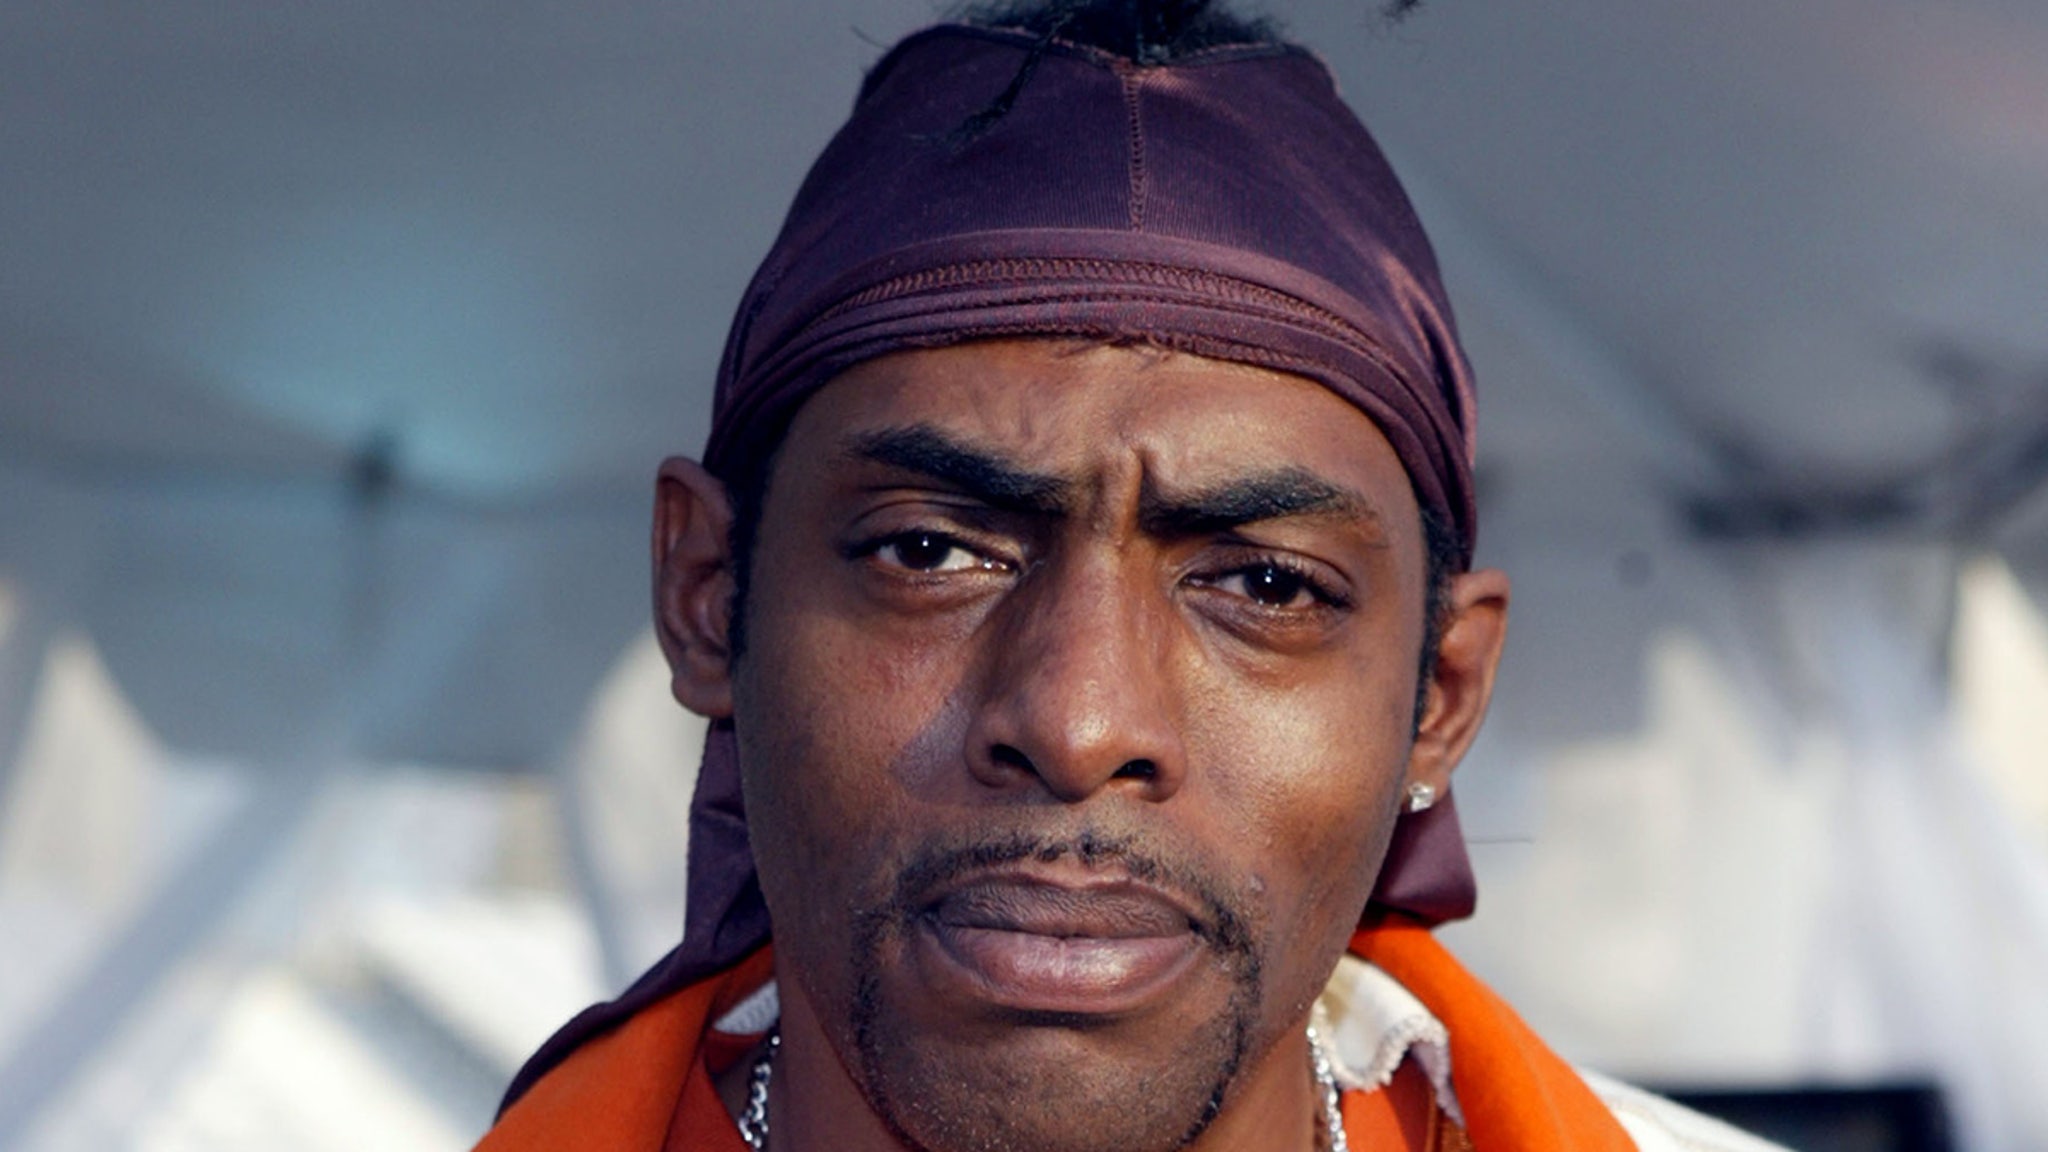 Coolio Struggled with Severe Asthma, Friends Believe It Contributed to Death #Coolio